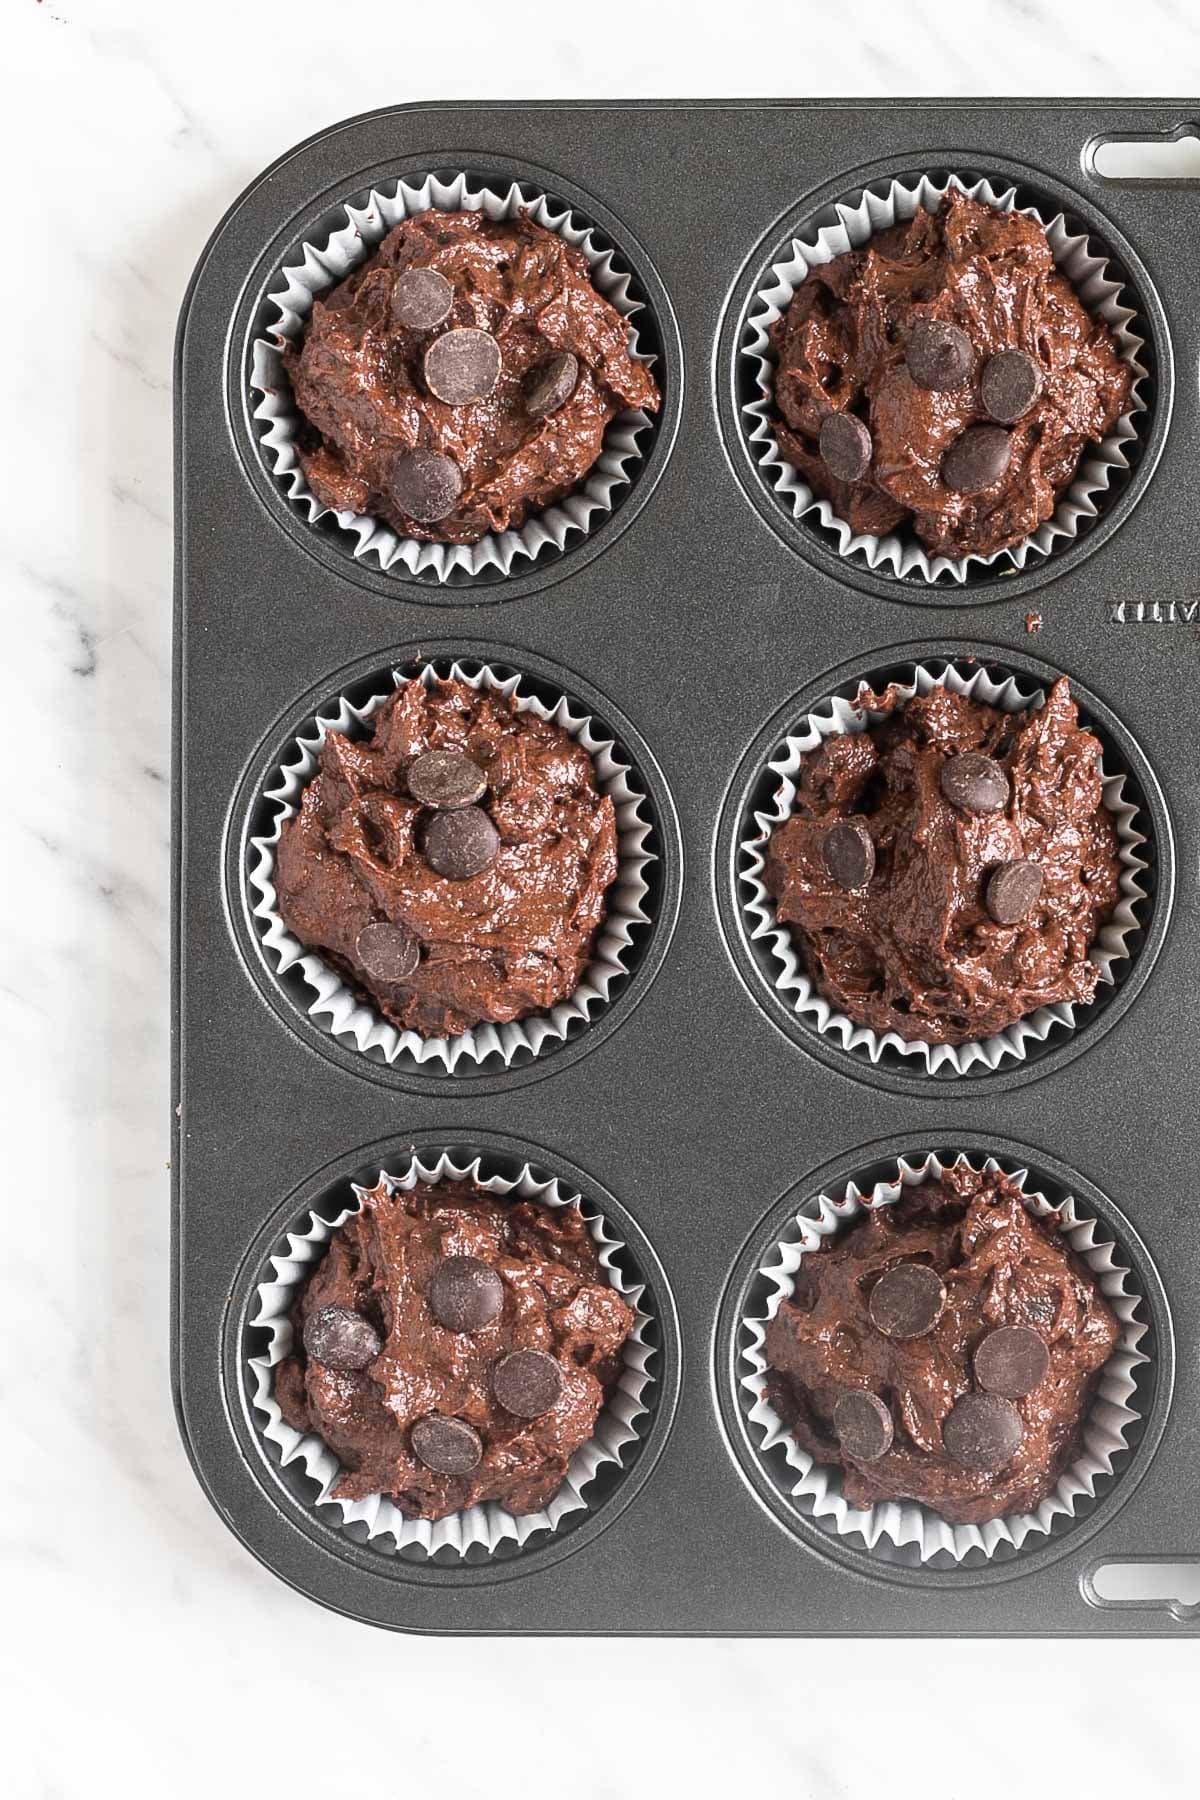 A muffin tin lined with white cupcake liners and filled with dark brown batter mixed with chocolate chips